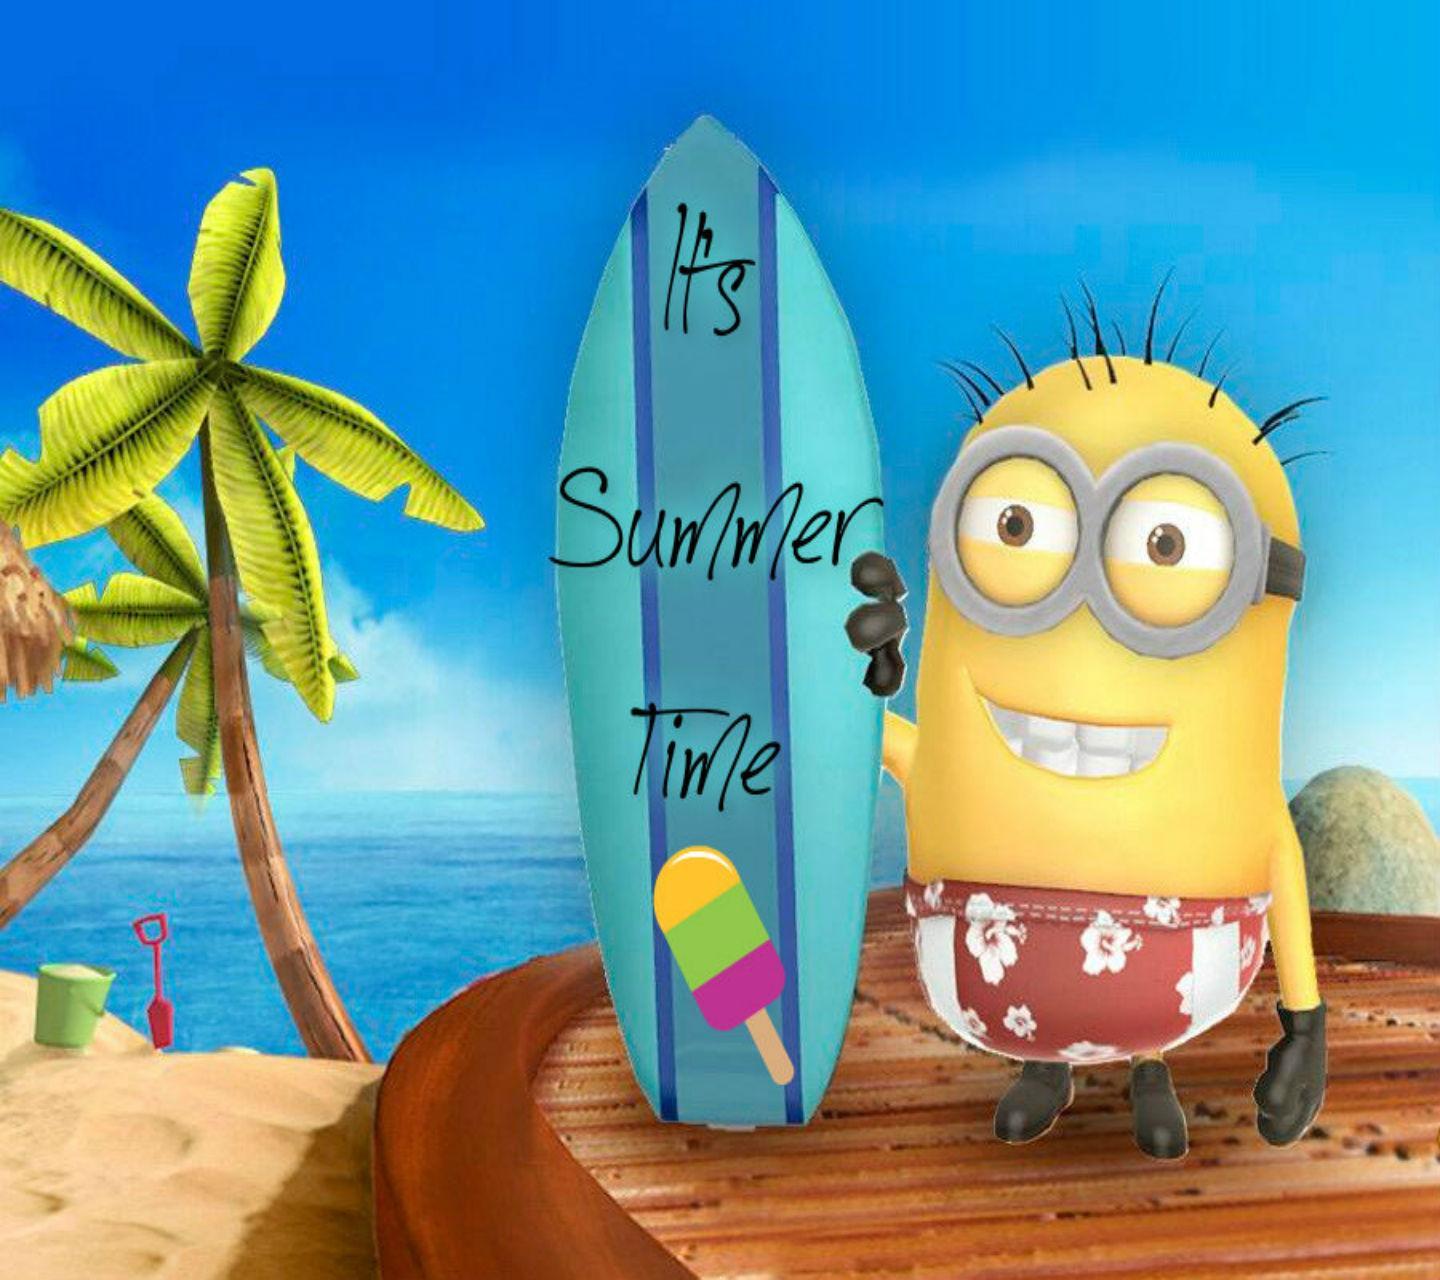 Download Summer minion wallpaper for your mobile cell phone